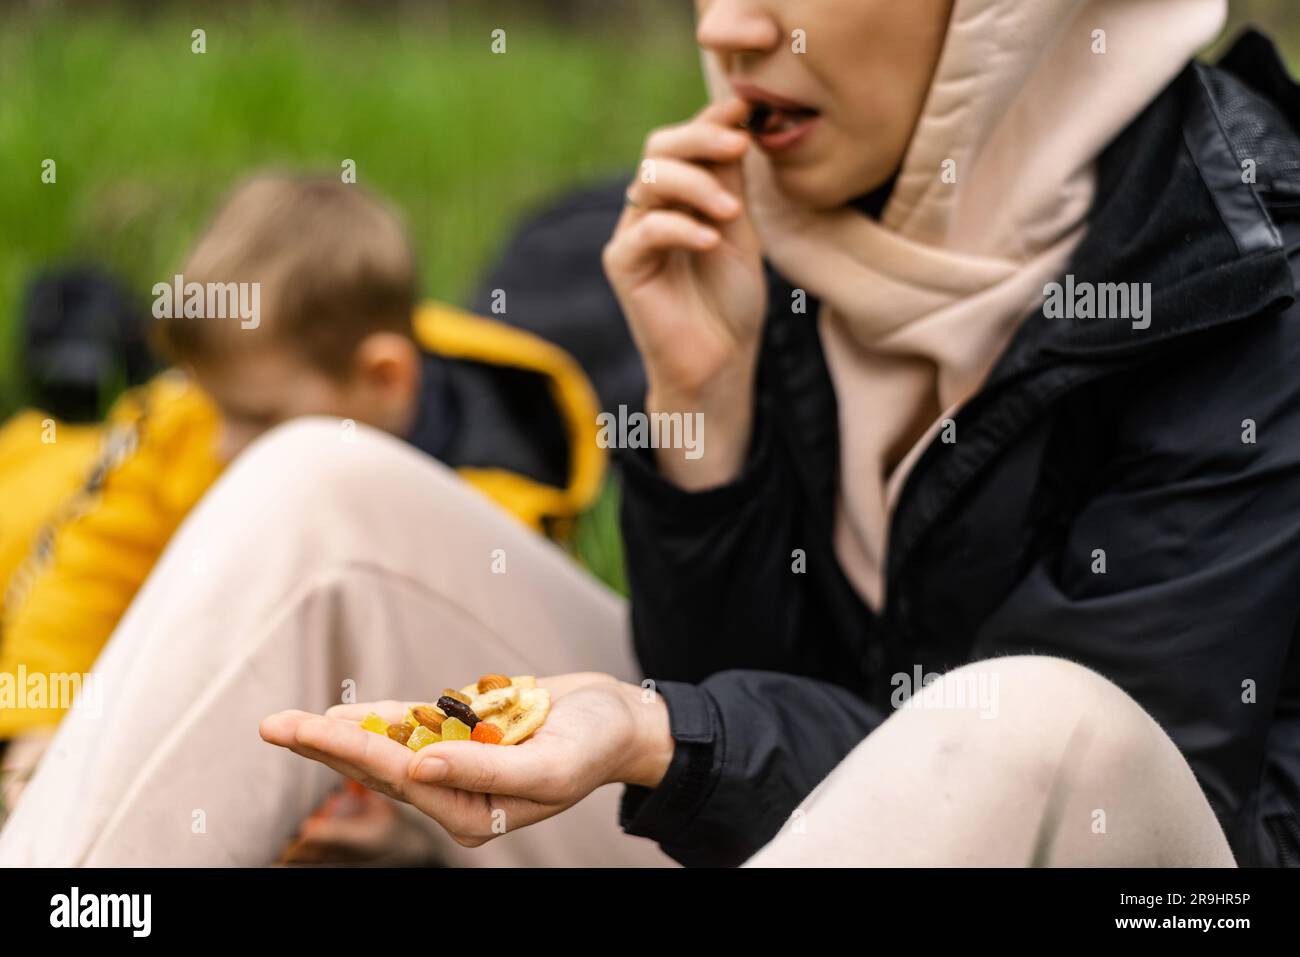 A woman holds various dried fruits and nuts in her hand. Sits on the green grass in the forest. Snack during the hike, walk. Healthy vegetarian food. Stock Photo